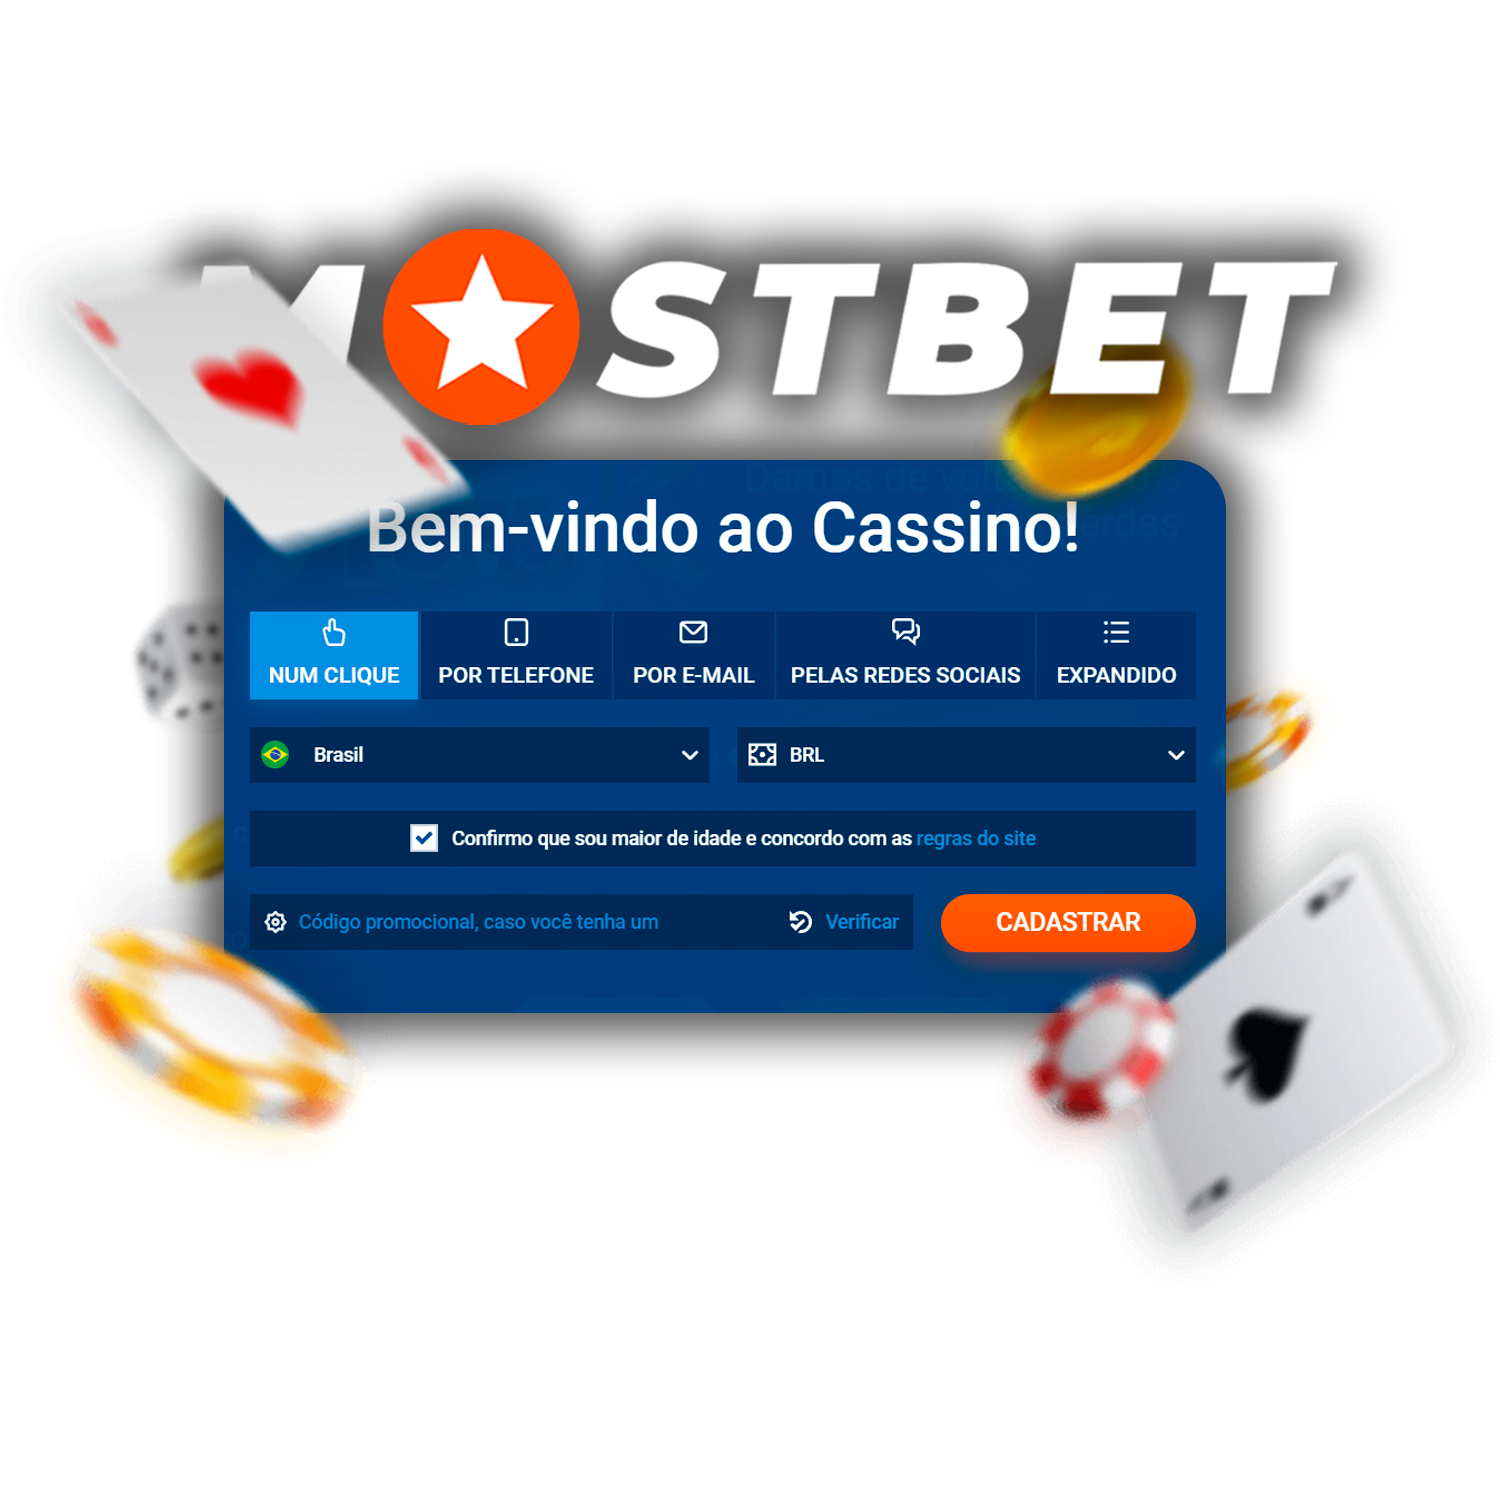 Use the promo code to get additional bonuses from Mostbet.